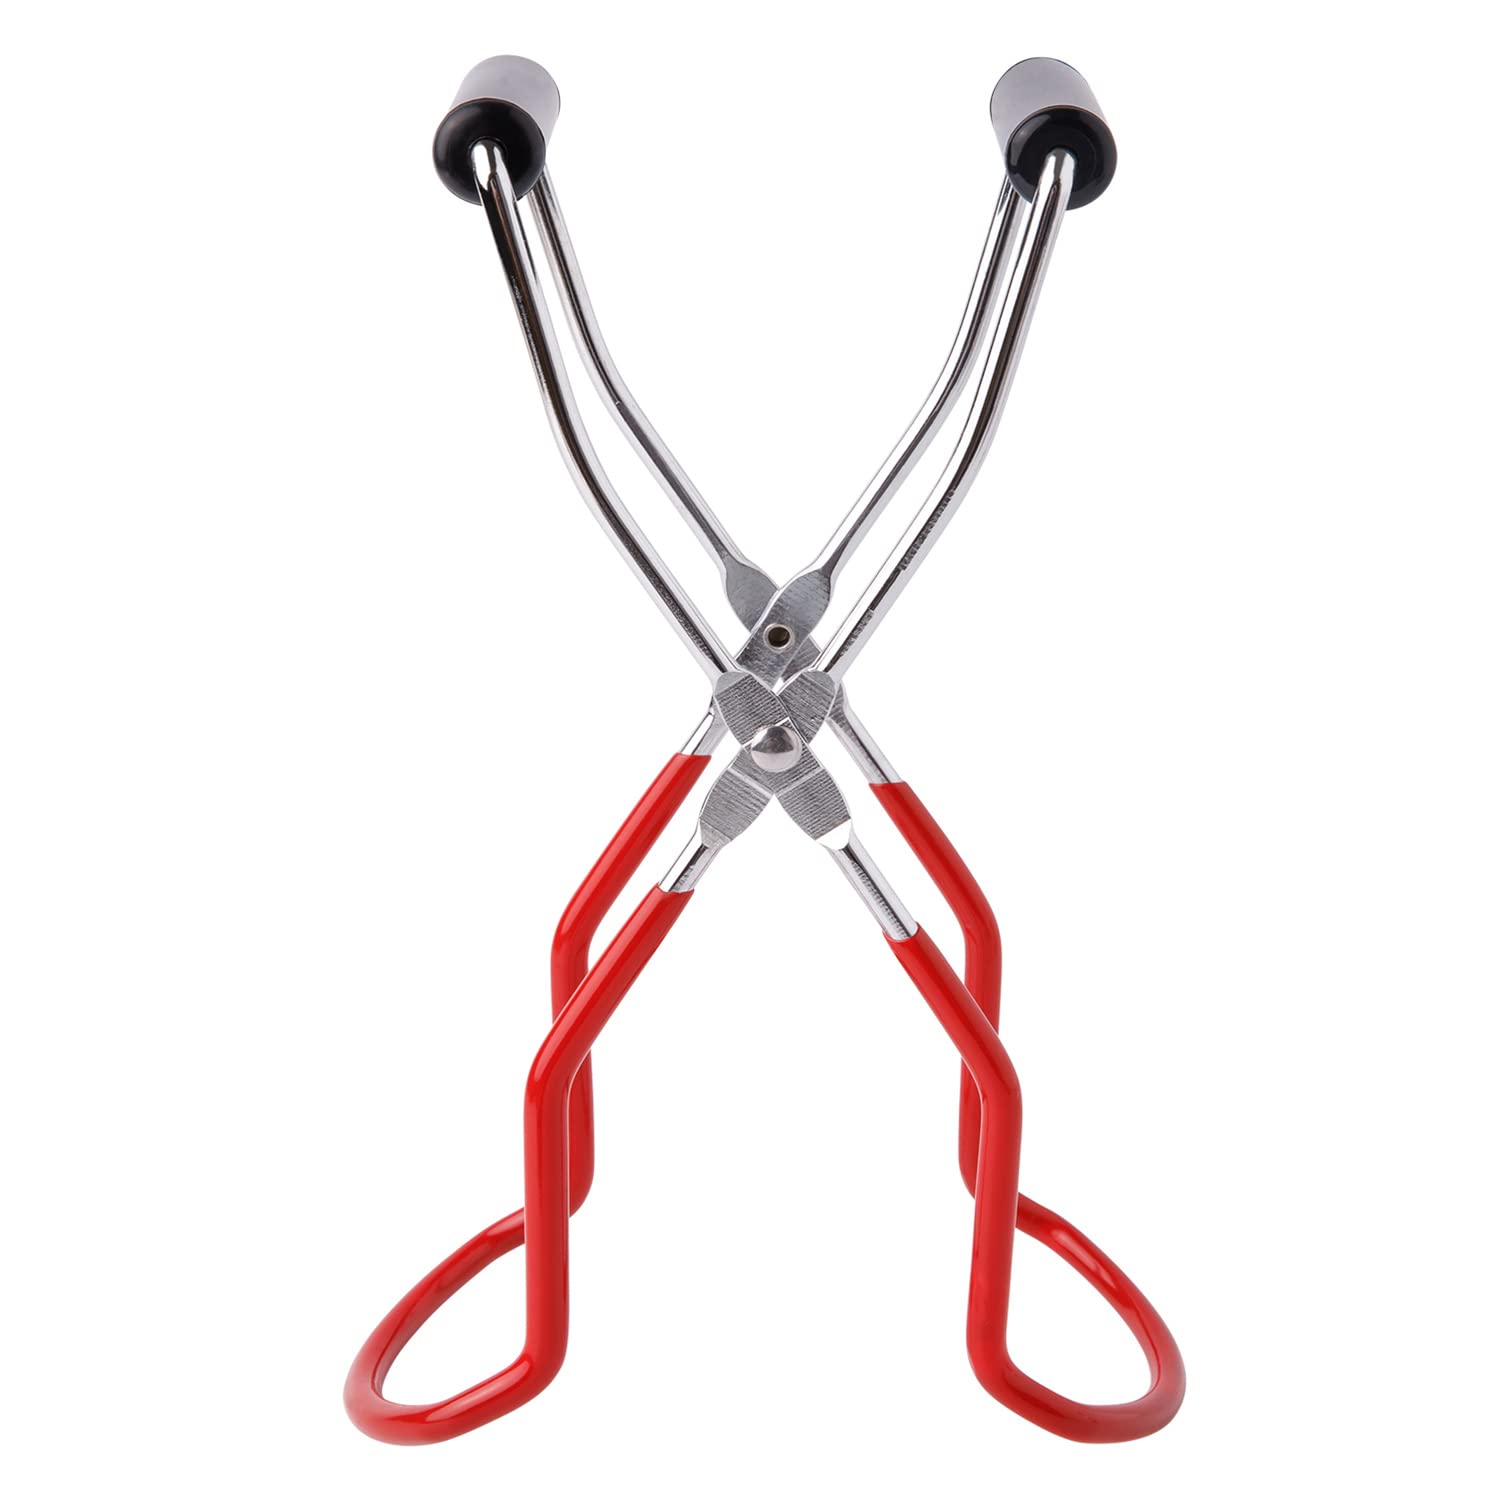 Eeoyu Canning Jar Lifter Tongs Stainless Steel Jar Lifter with Grip Handle for Home Kitchen (Red)